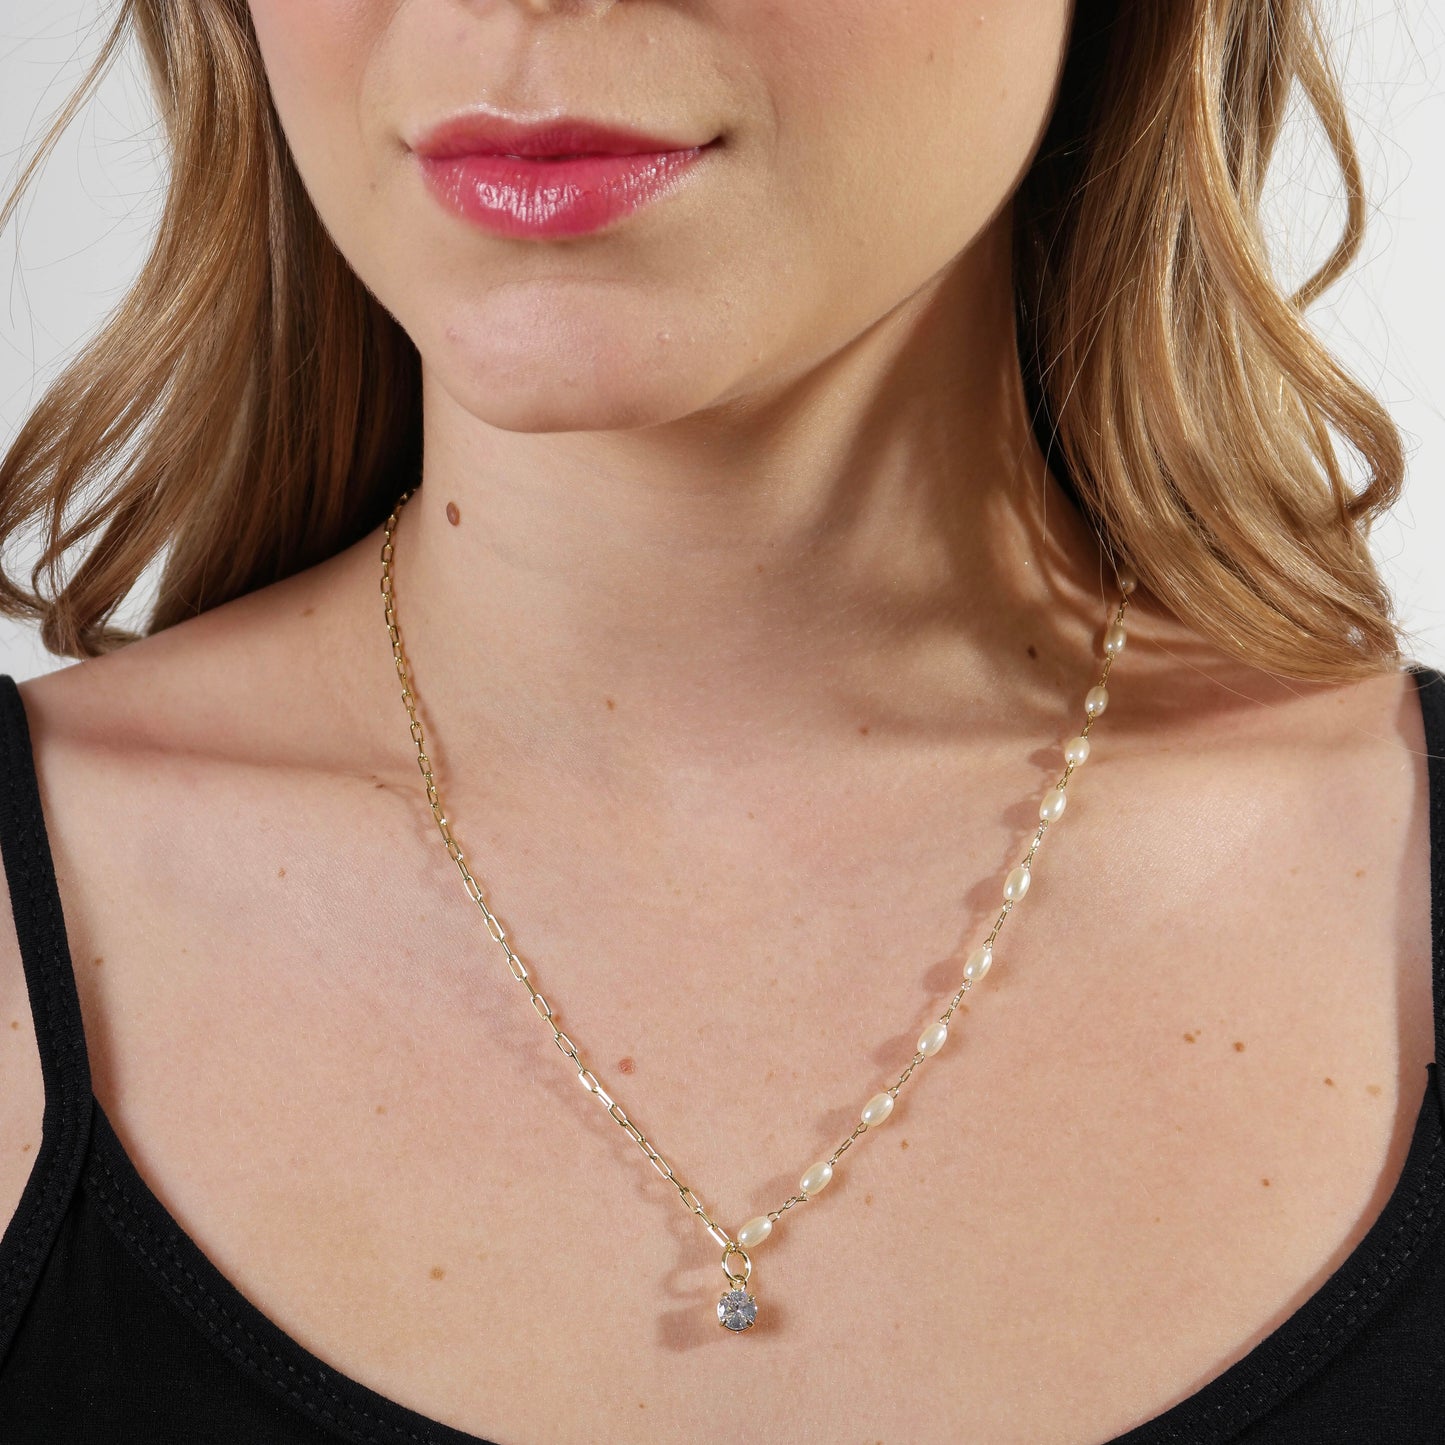 18k Gold Filled Oval Shaped Pearl Necklace With Cubic Zirconia Stone Charm